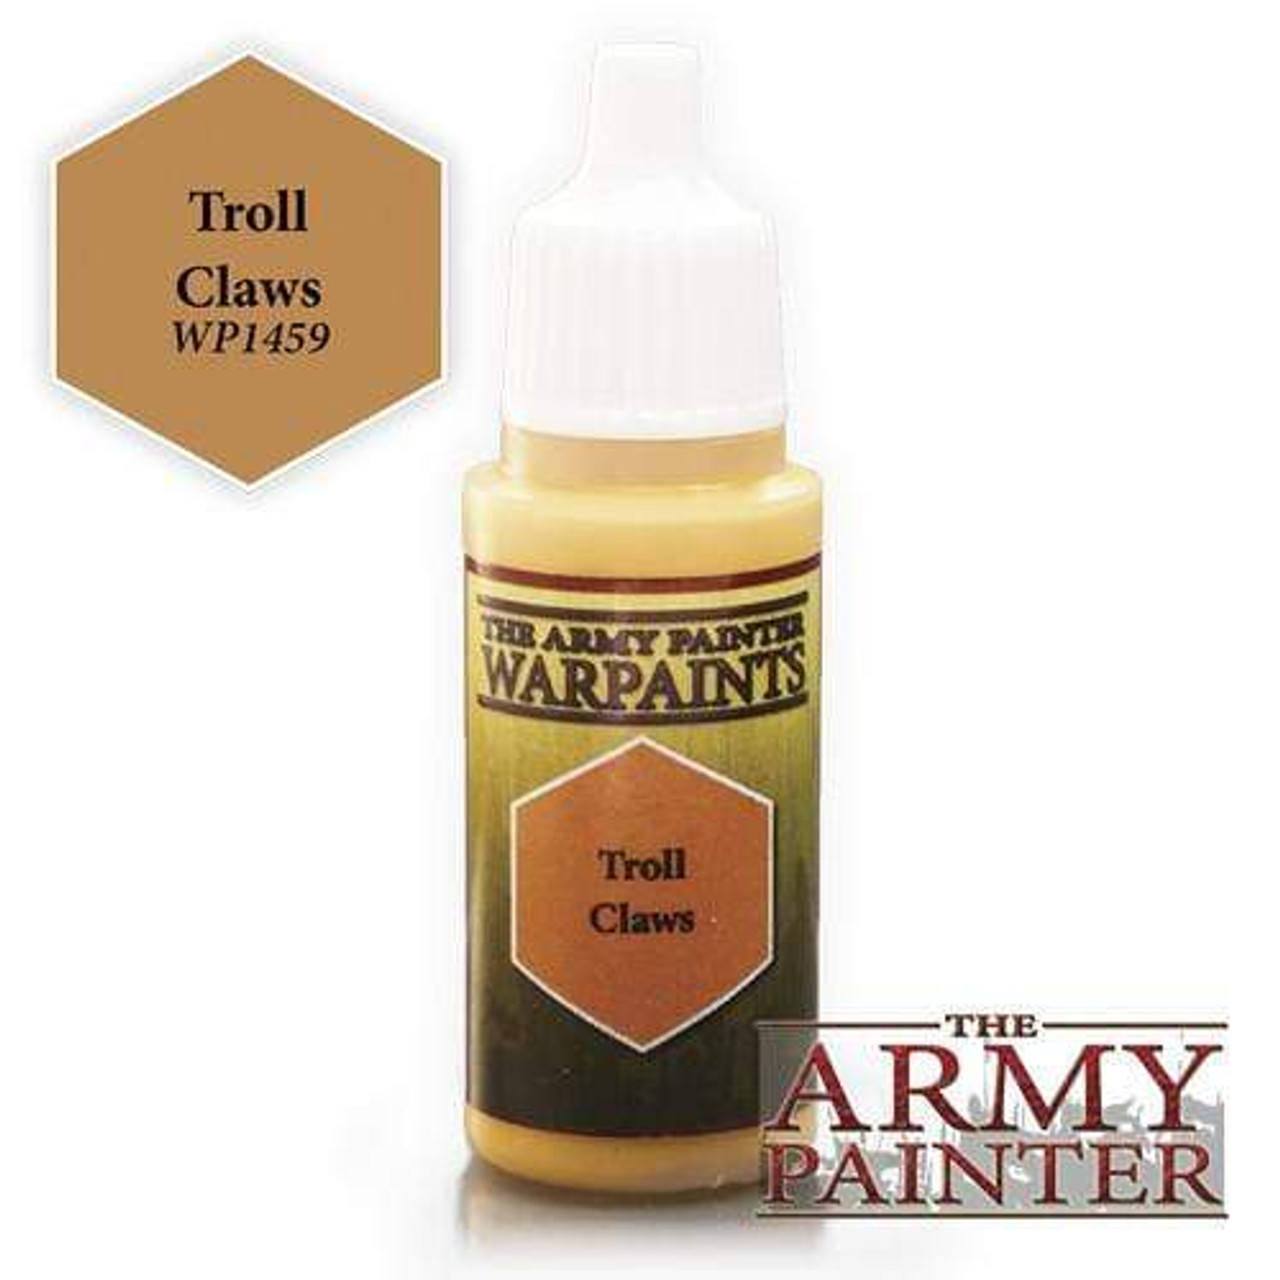 Army Painter Warpaint: Troll Claws